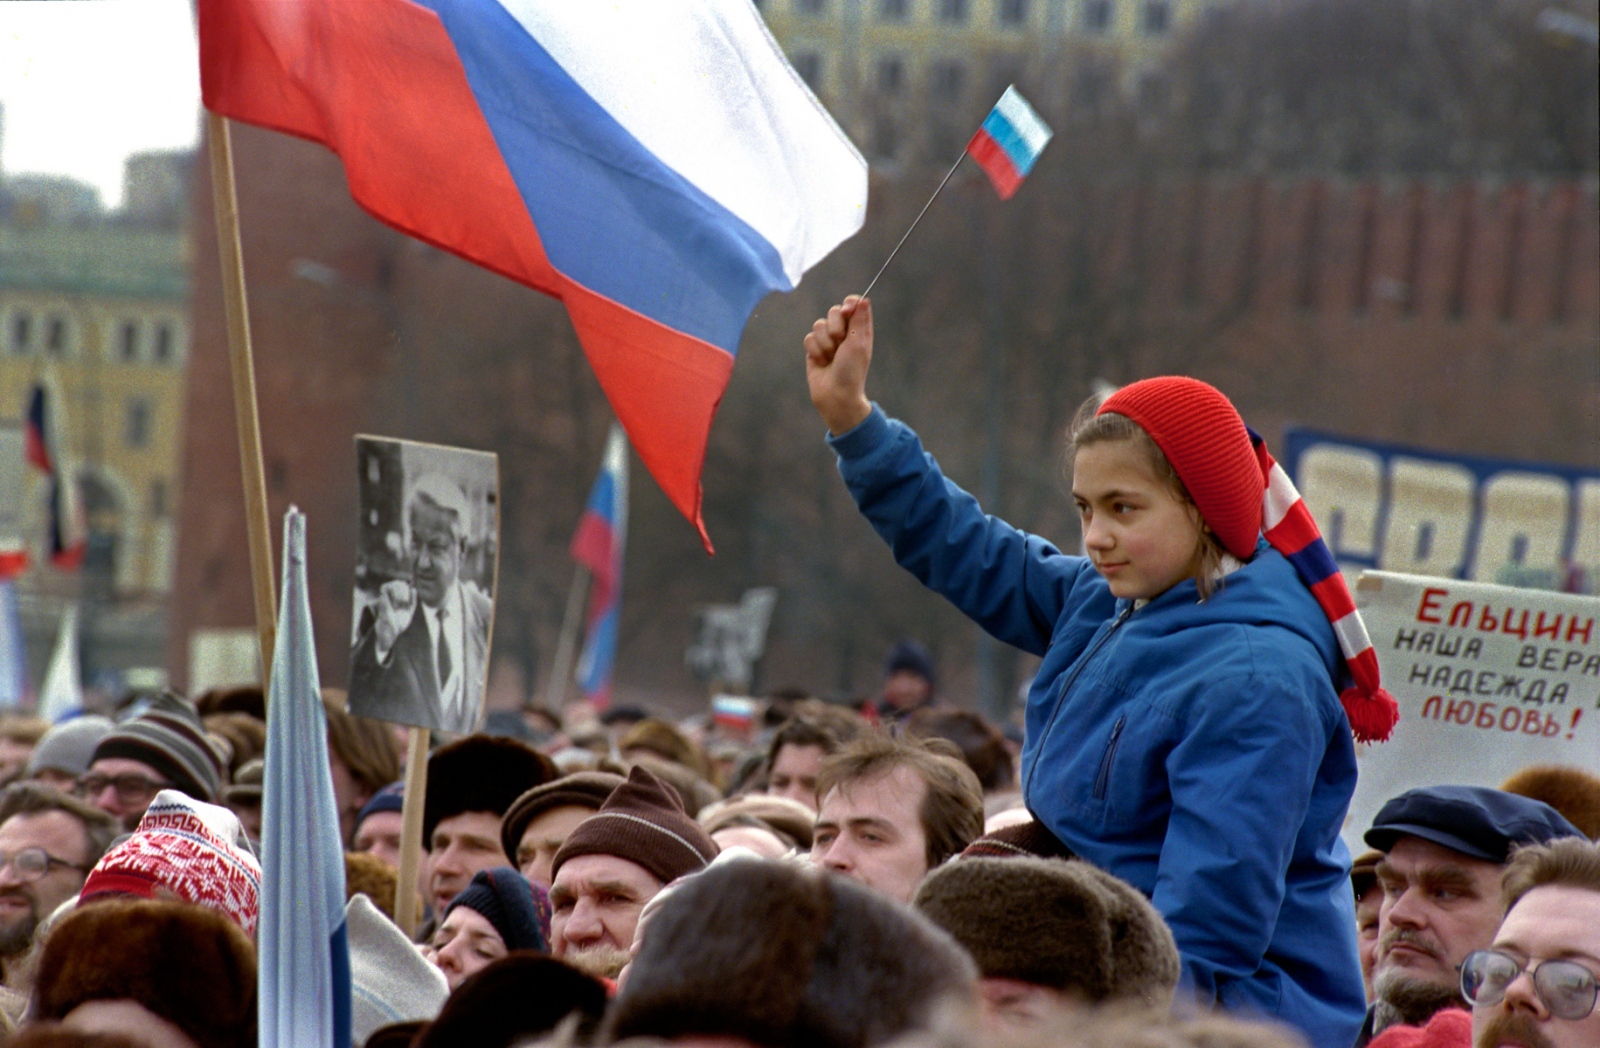 Russia In Transition - 1990s - Crowds gather in Red Square in support of President...